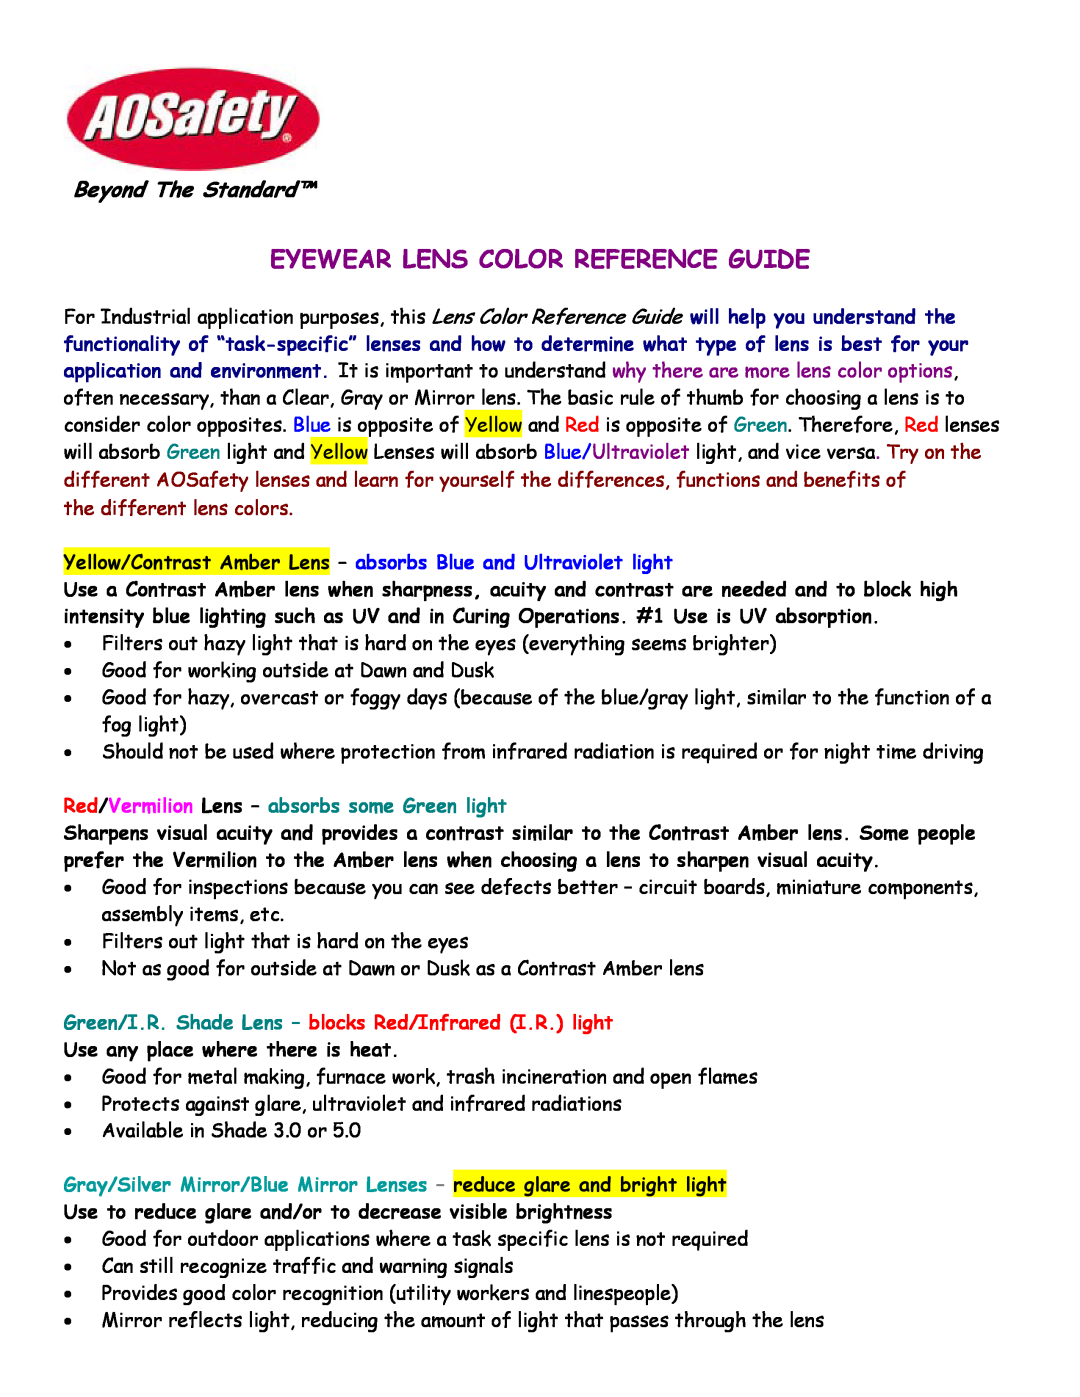 AOSafety manual Eyewear Lens Color Reference Guide, Beyond The Standard, the different lens colors 